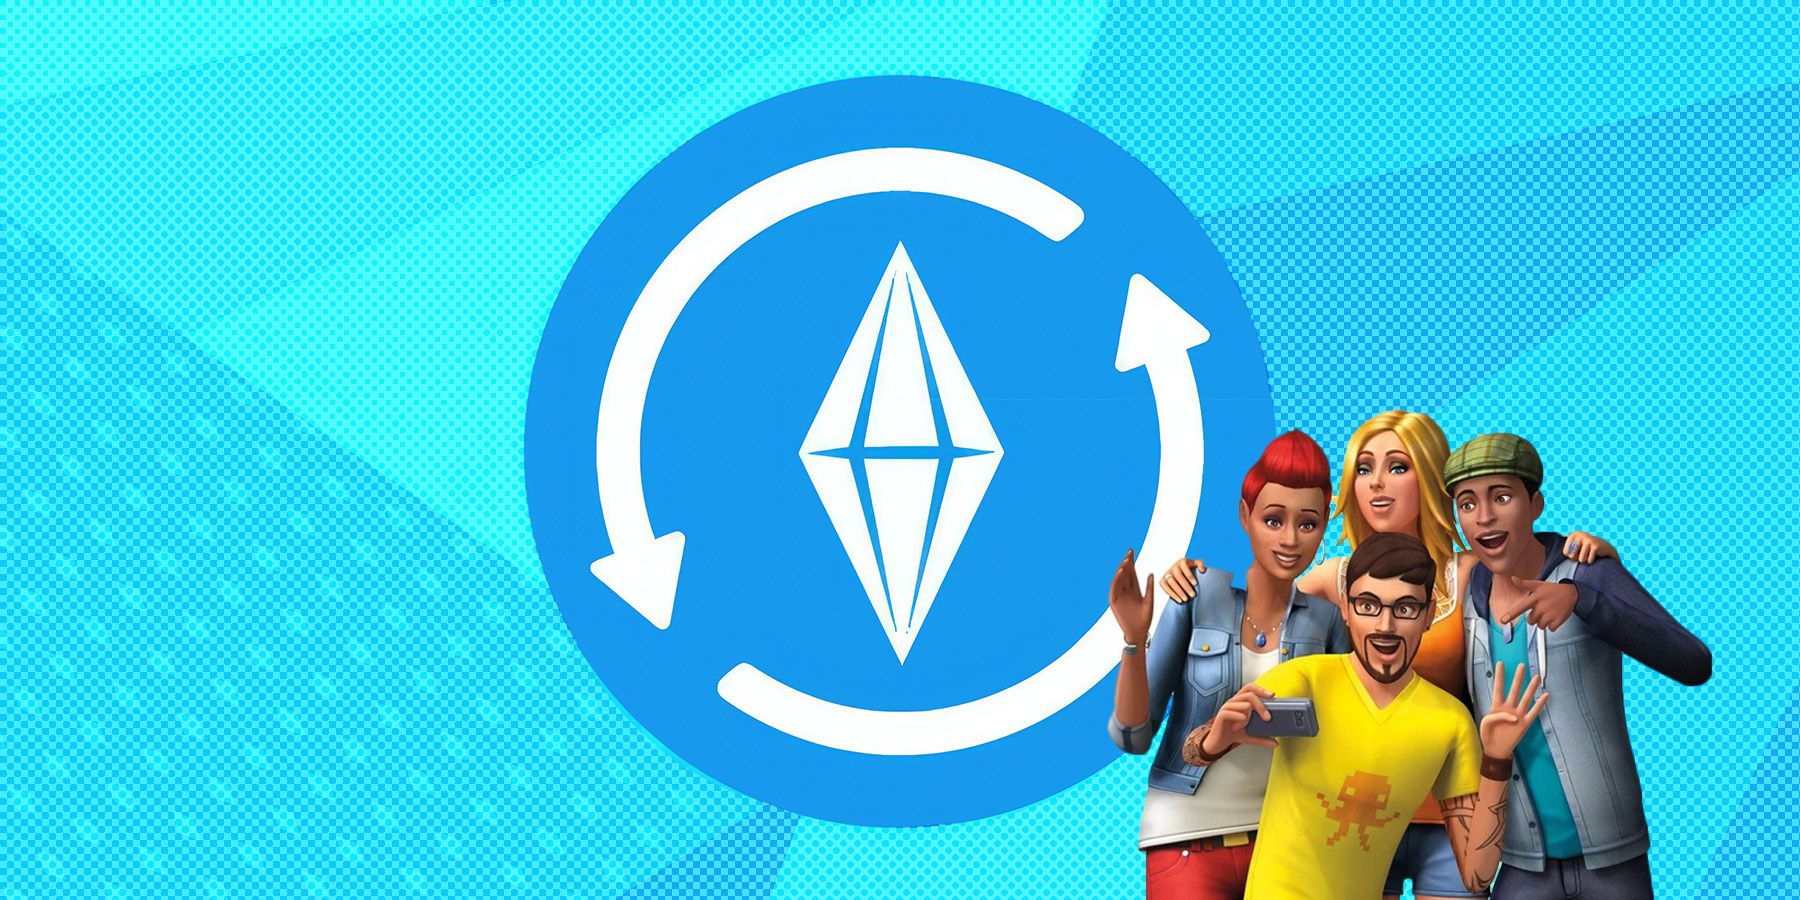 The Sims 4 blue update icon with four happy sims taking a selfie